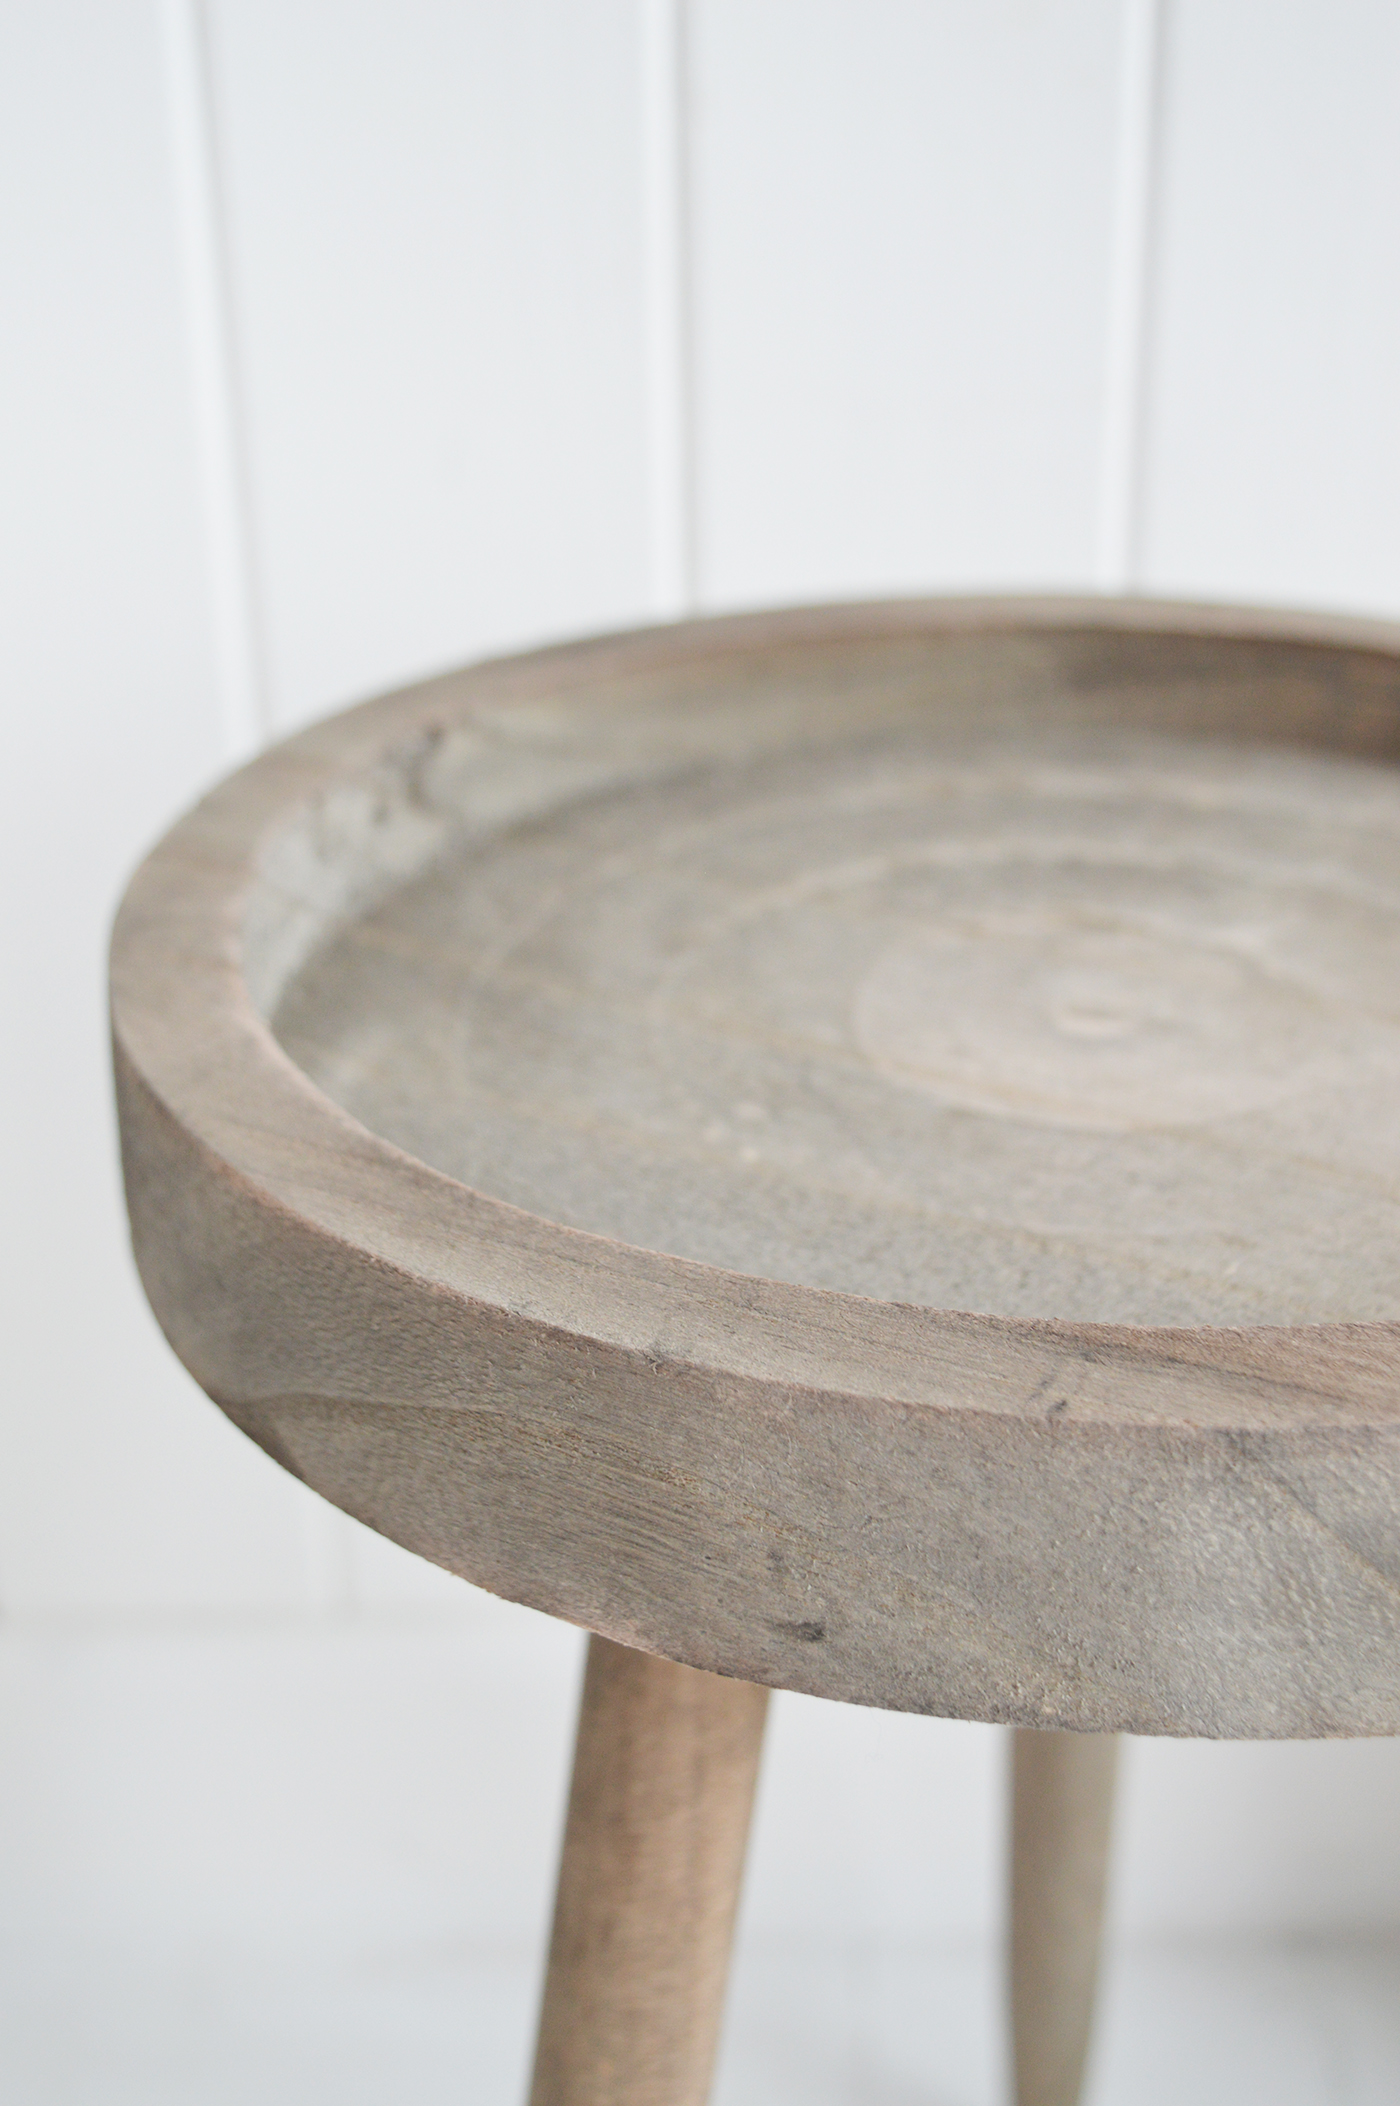 Pawtucket Grey Round Wooden Stool Side Table - Coastal, Country Furniture